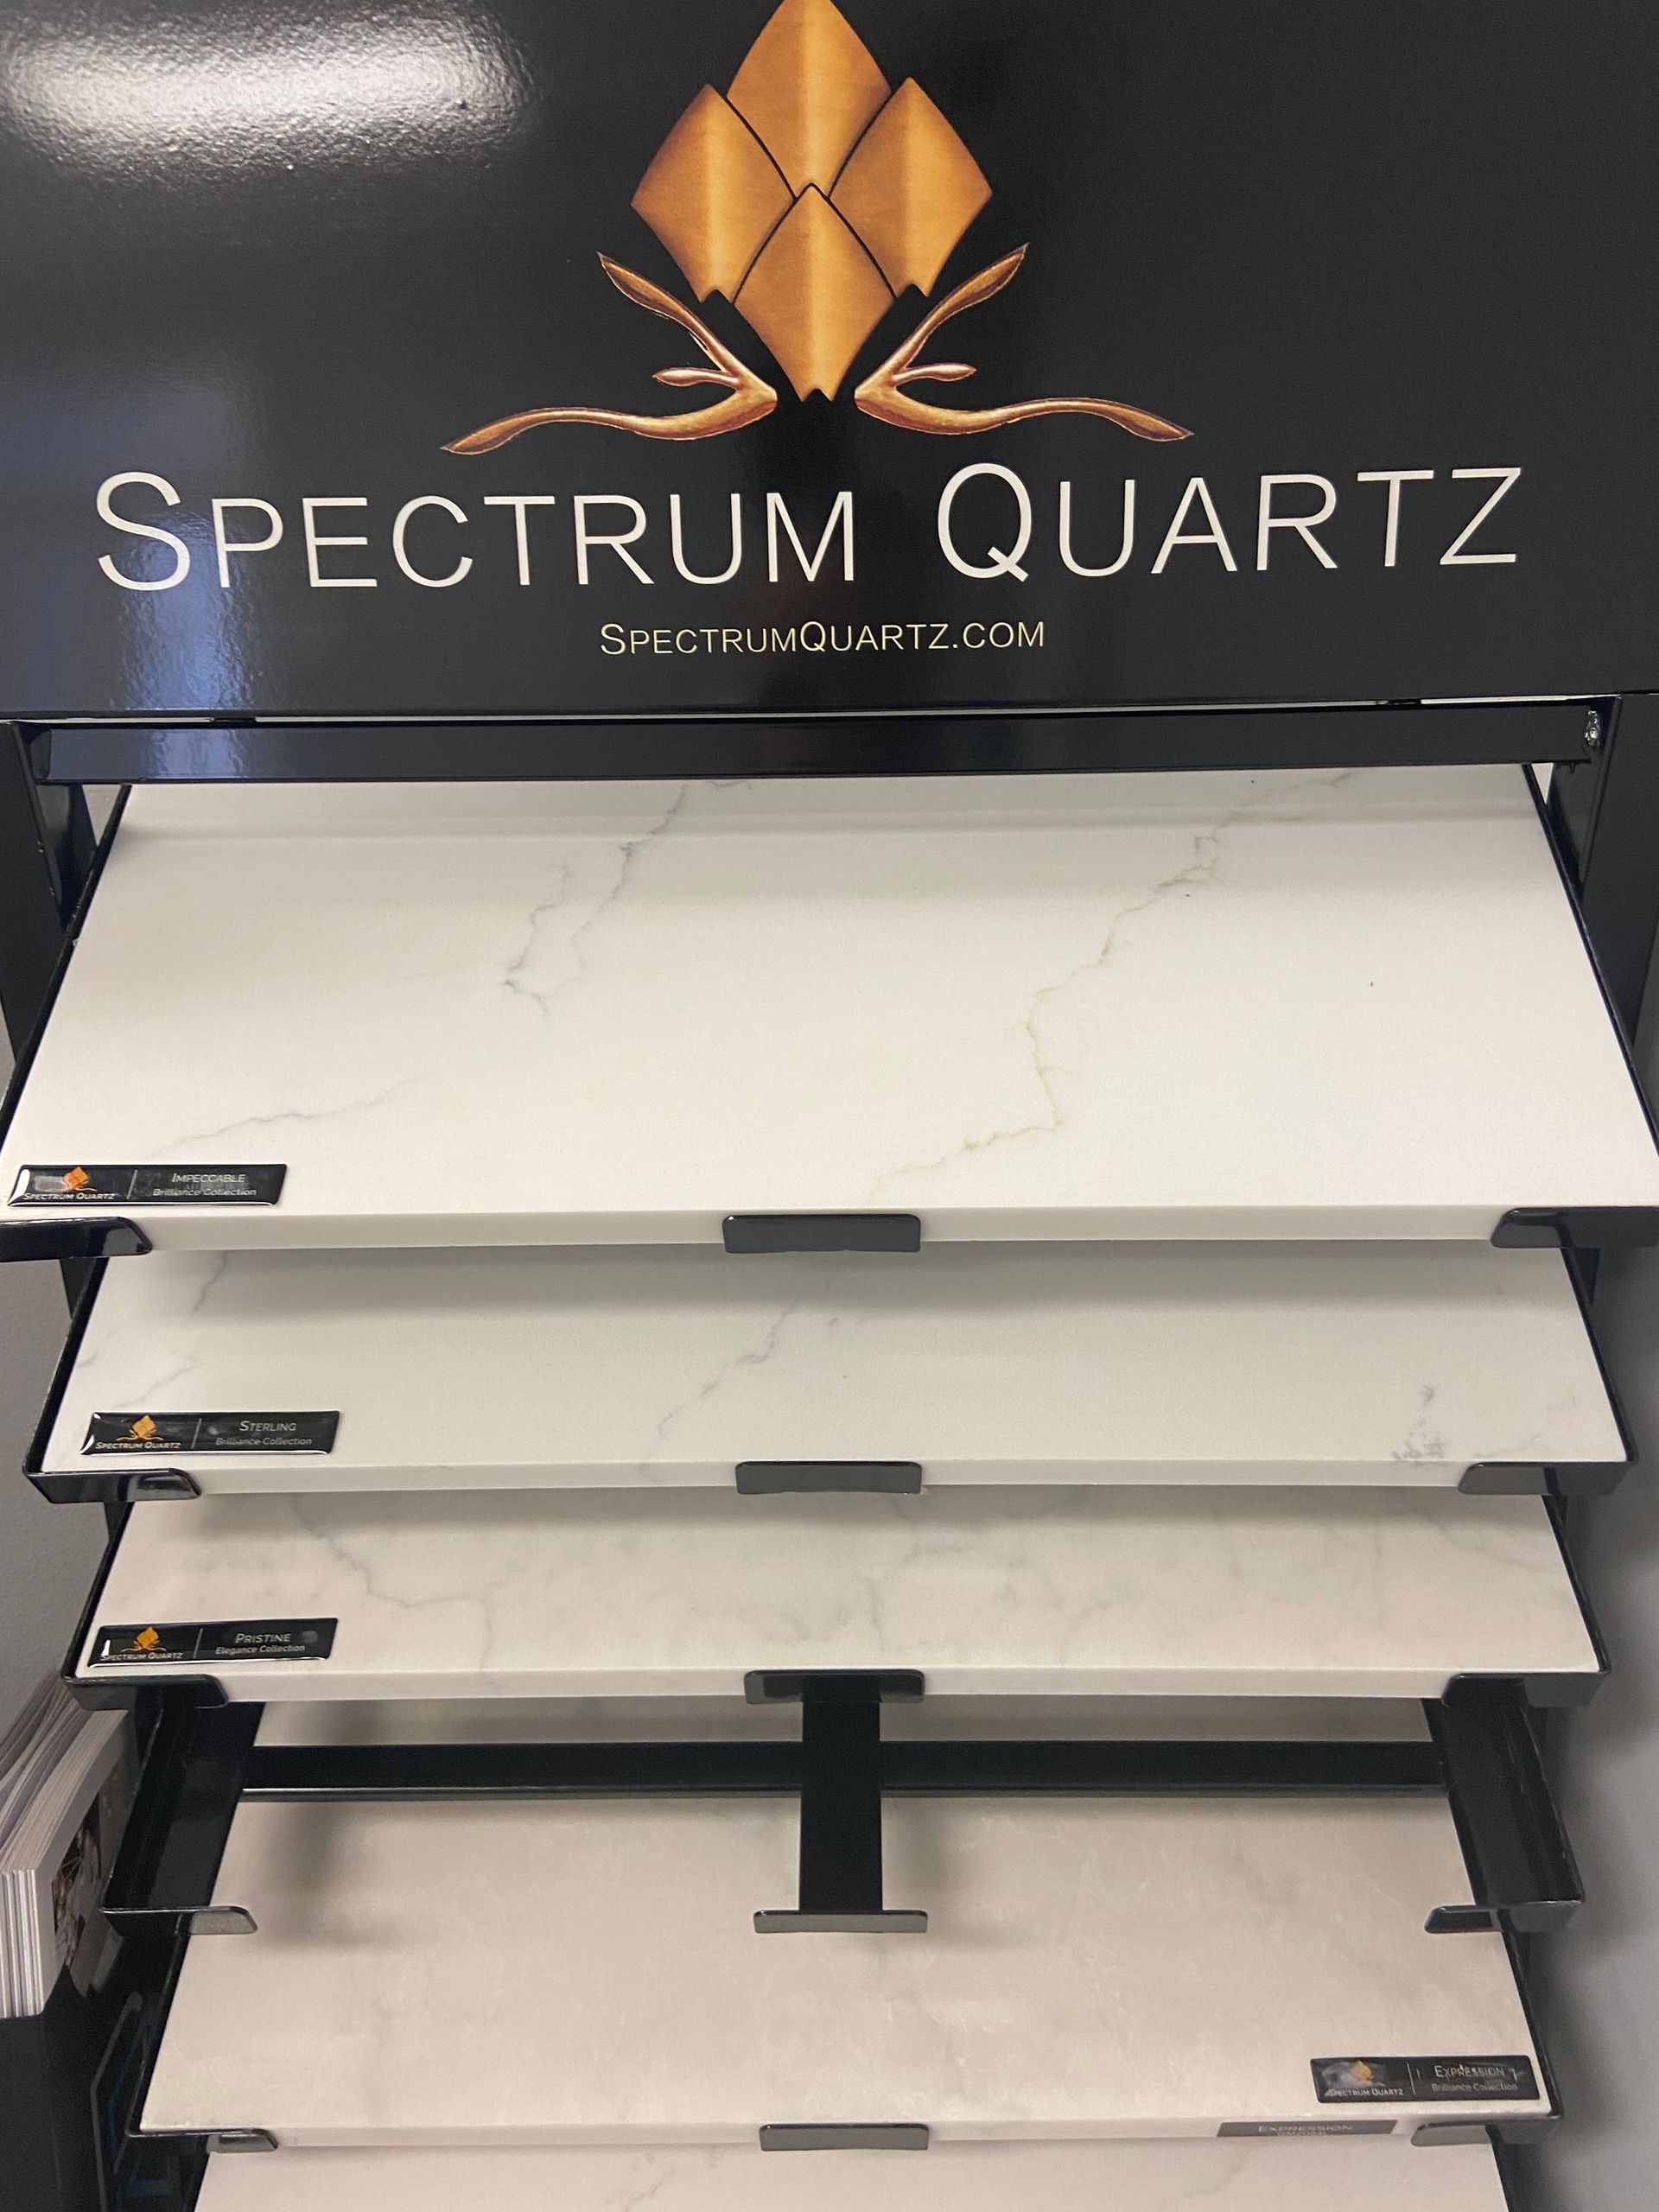 A display of spectrum quartz counter tops in a store